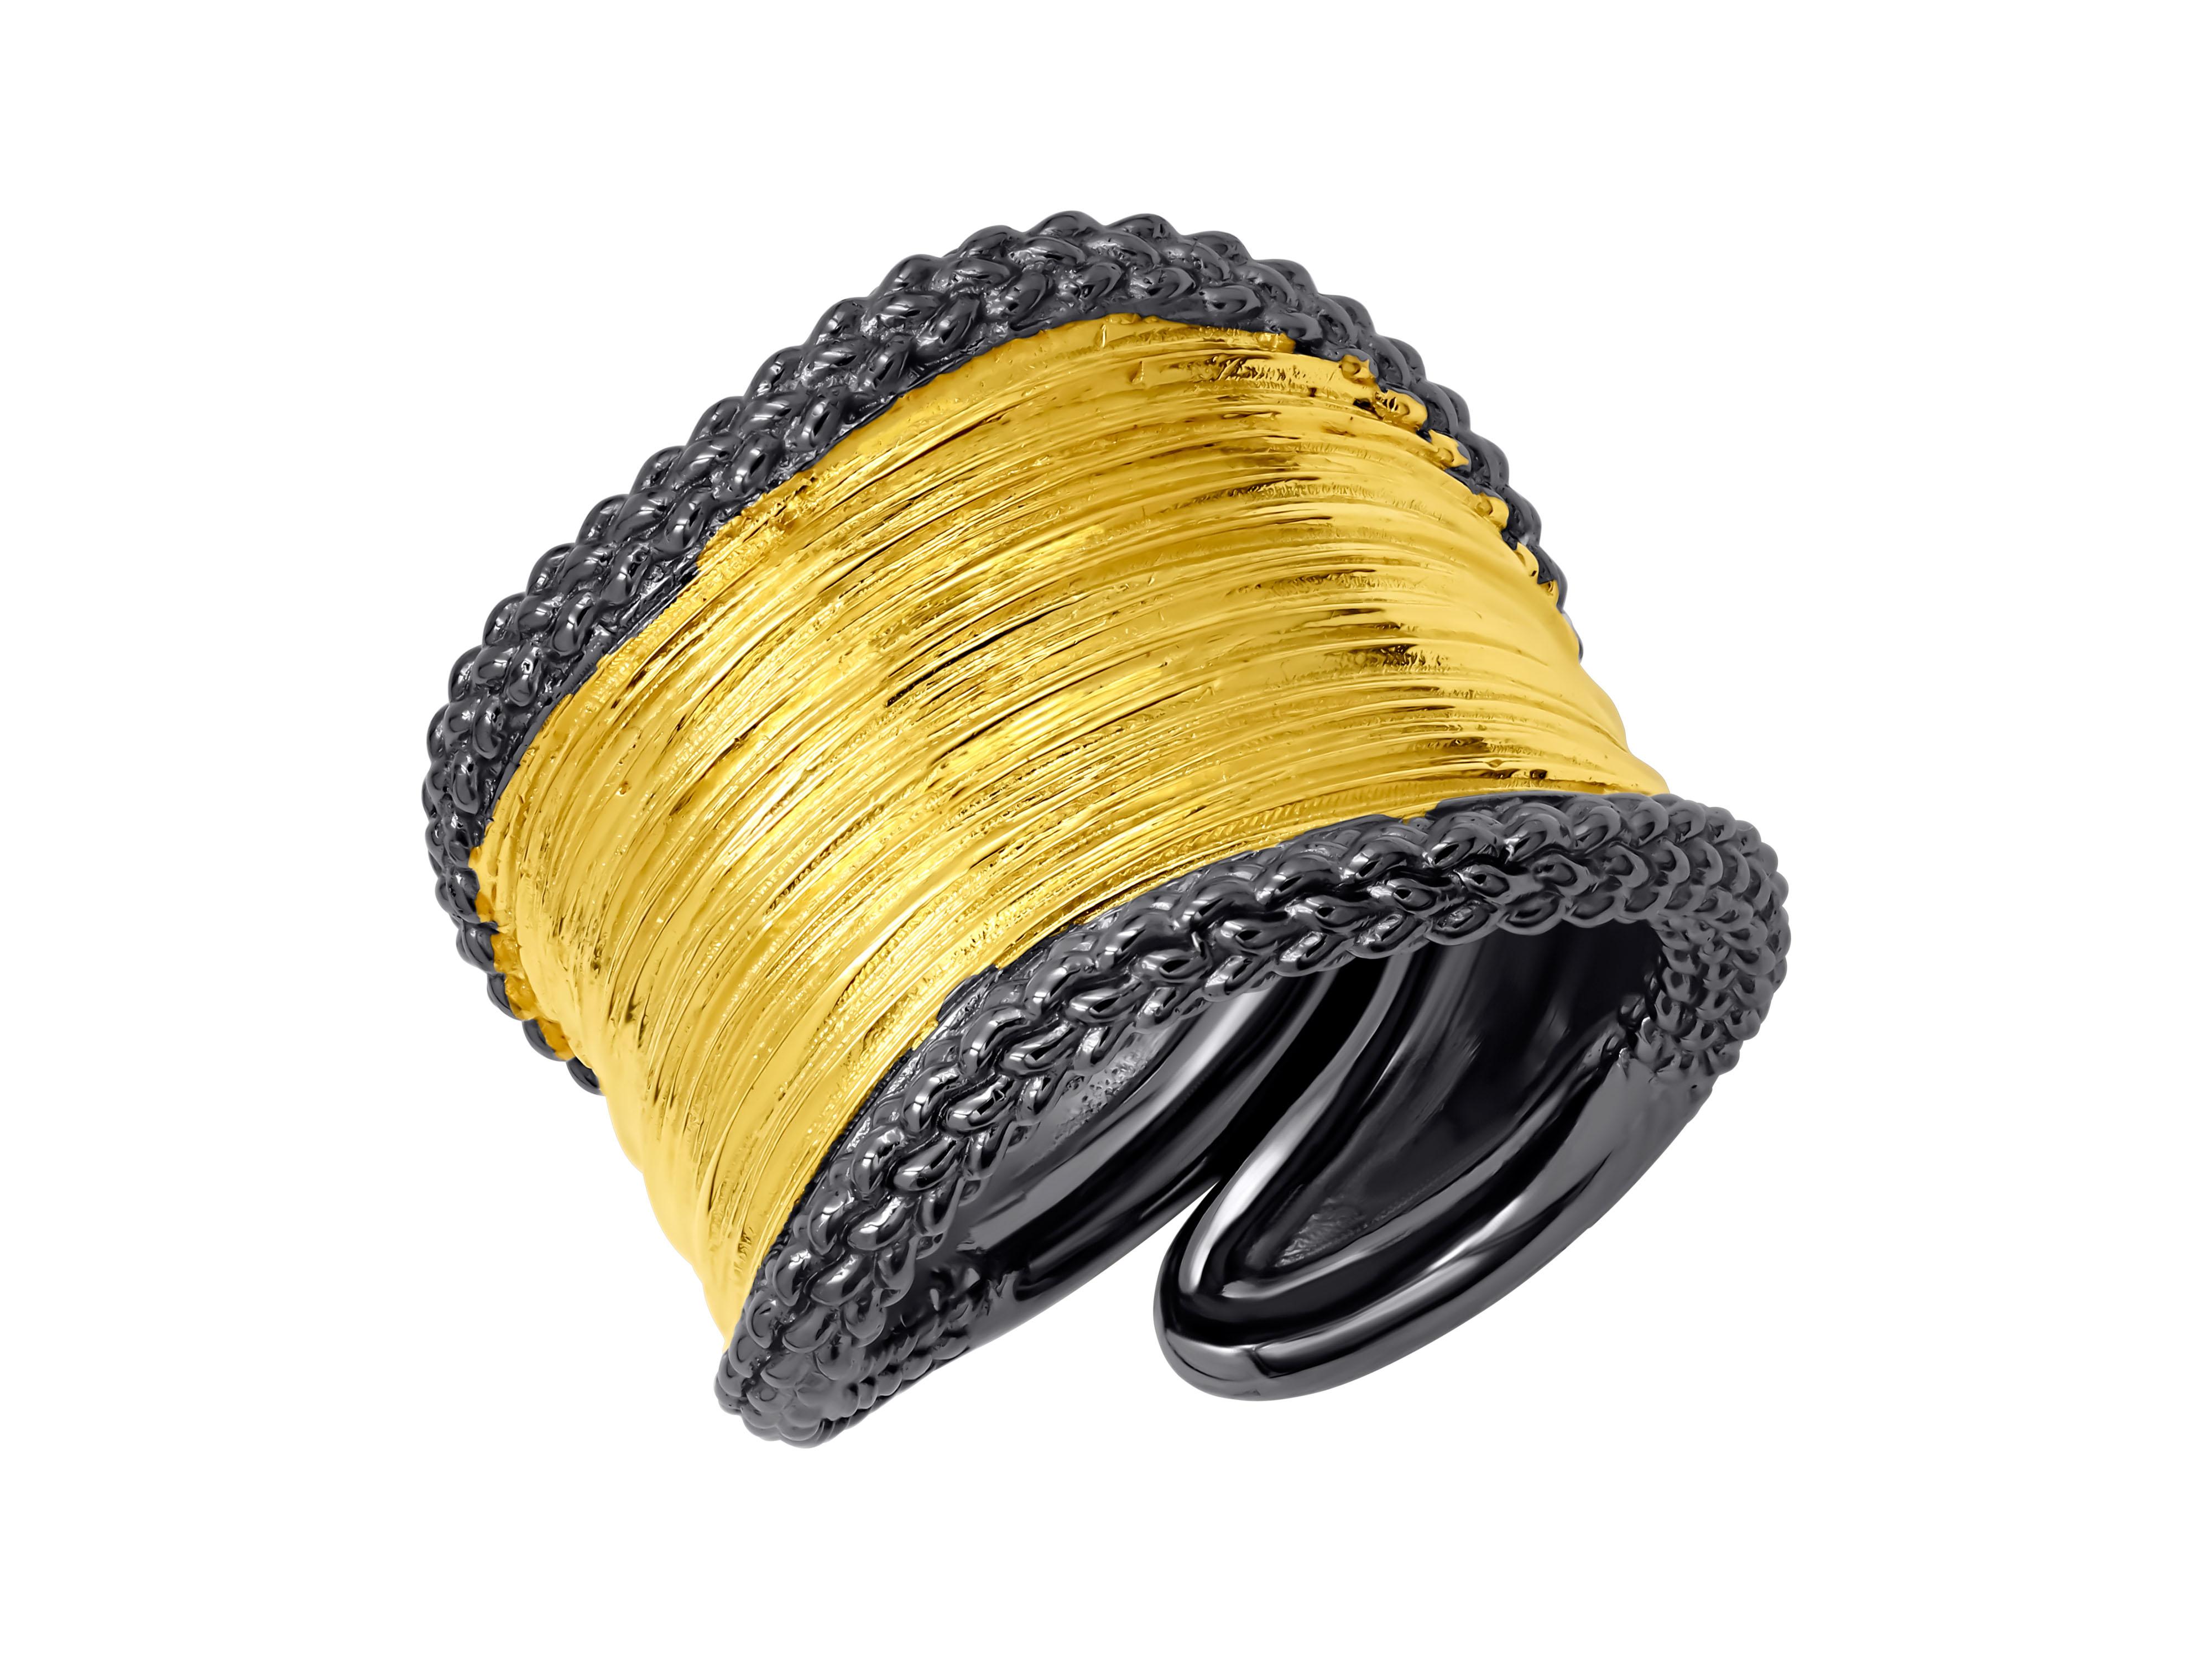 Statement piece of jewelry that features a wide band made of silver, with gold plating surface and a blackened edges. The band is adjustable and has a unique design and texture, adding an edgy and modern touch to the ring.
The gold plating gives the